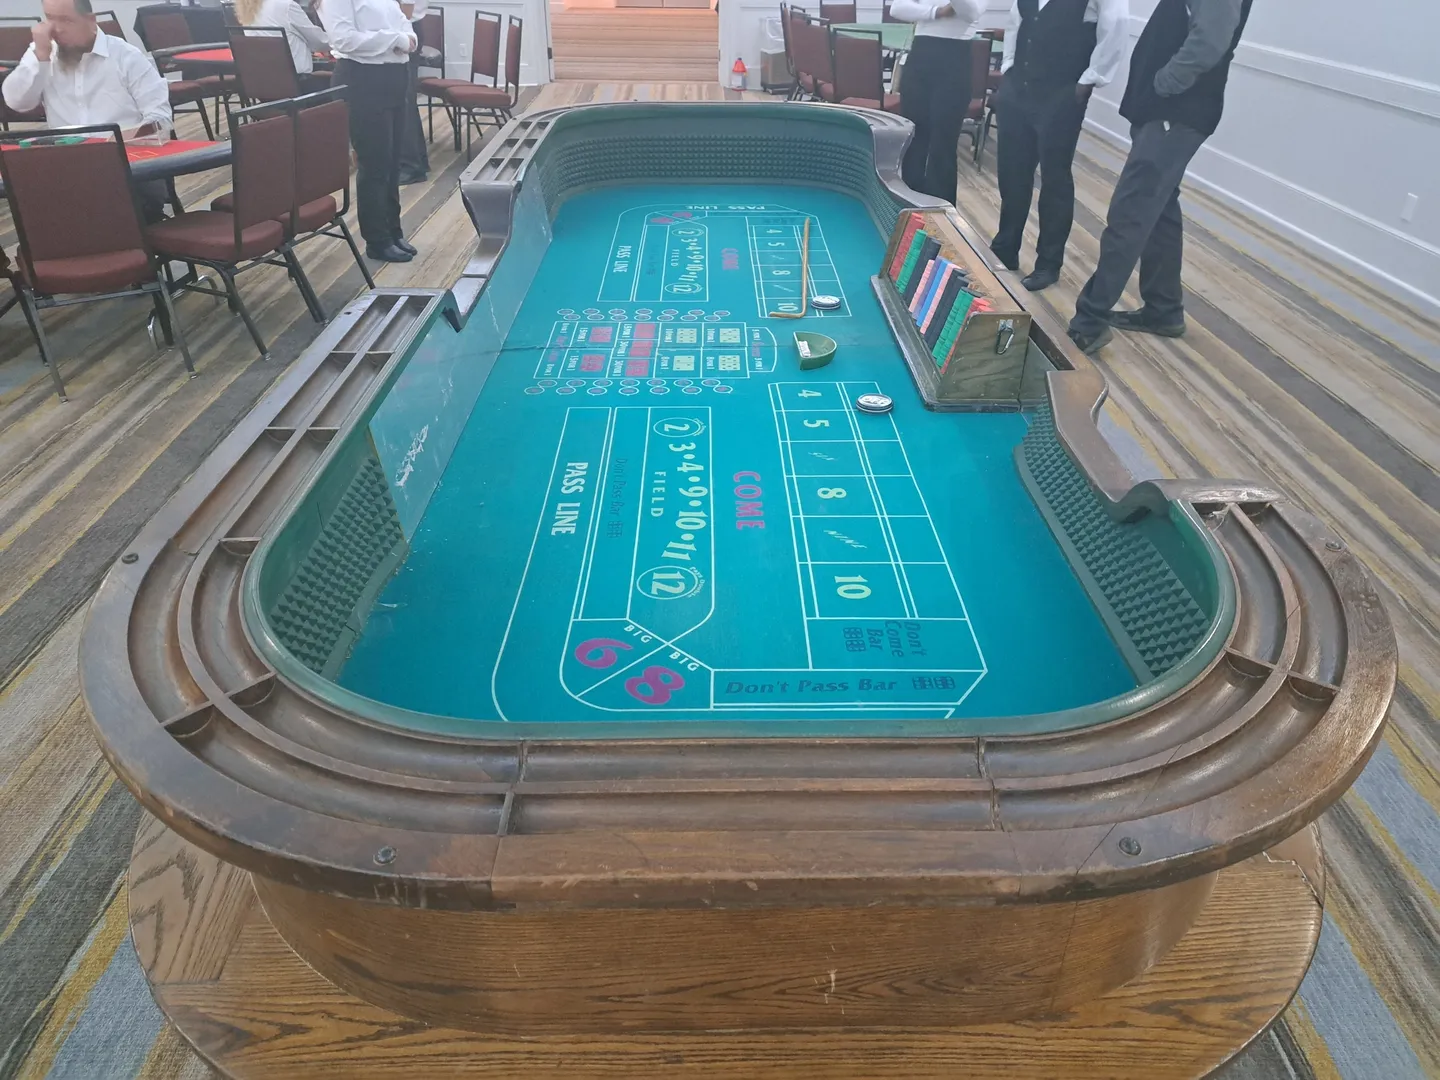 A large craps table with people standing around it.